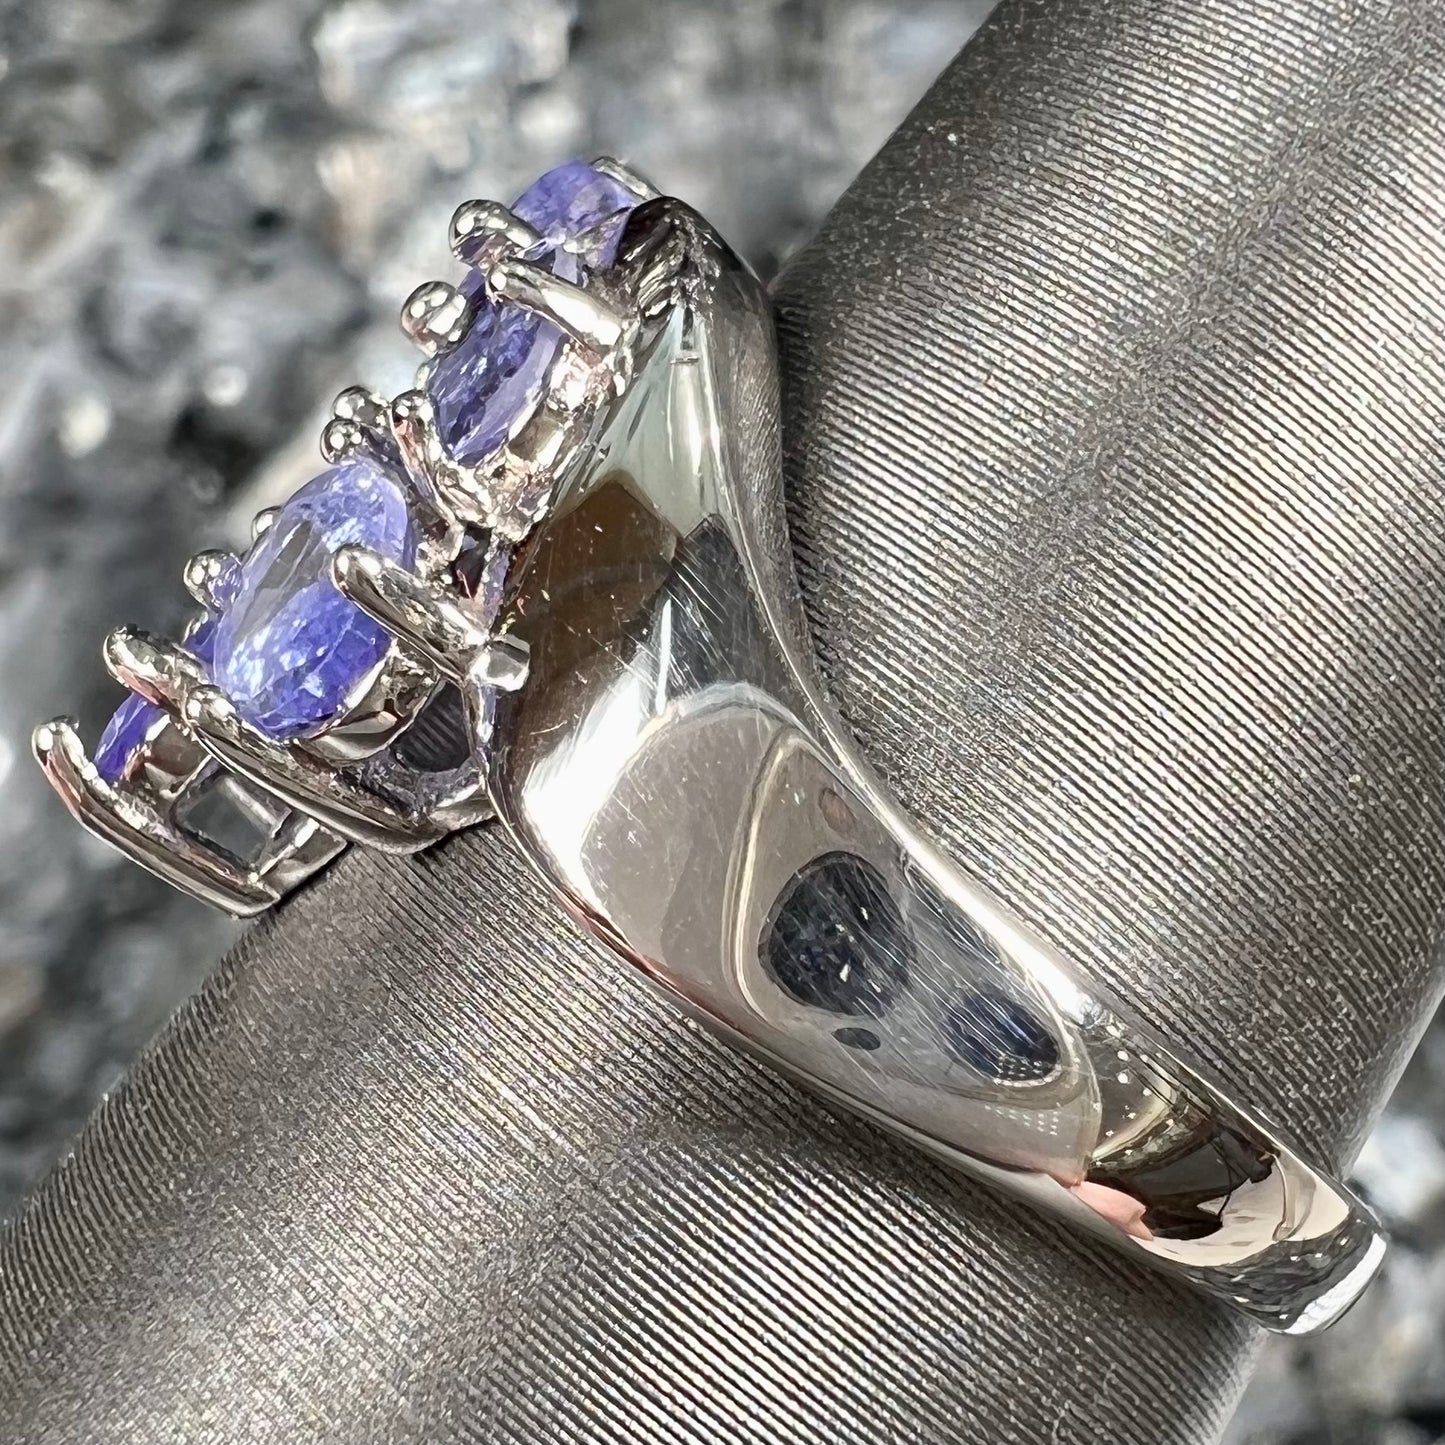 A sterling silver cluster ring prong set with seven faceted oval cut blue tanzanite stones.